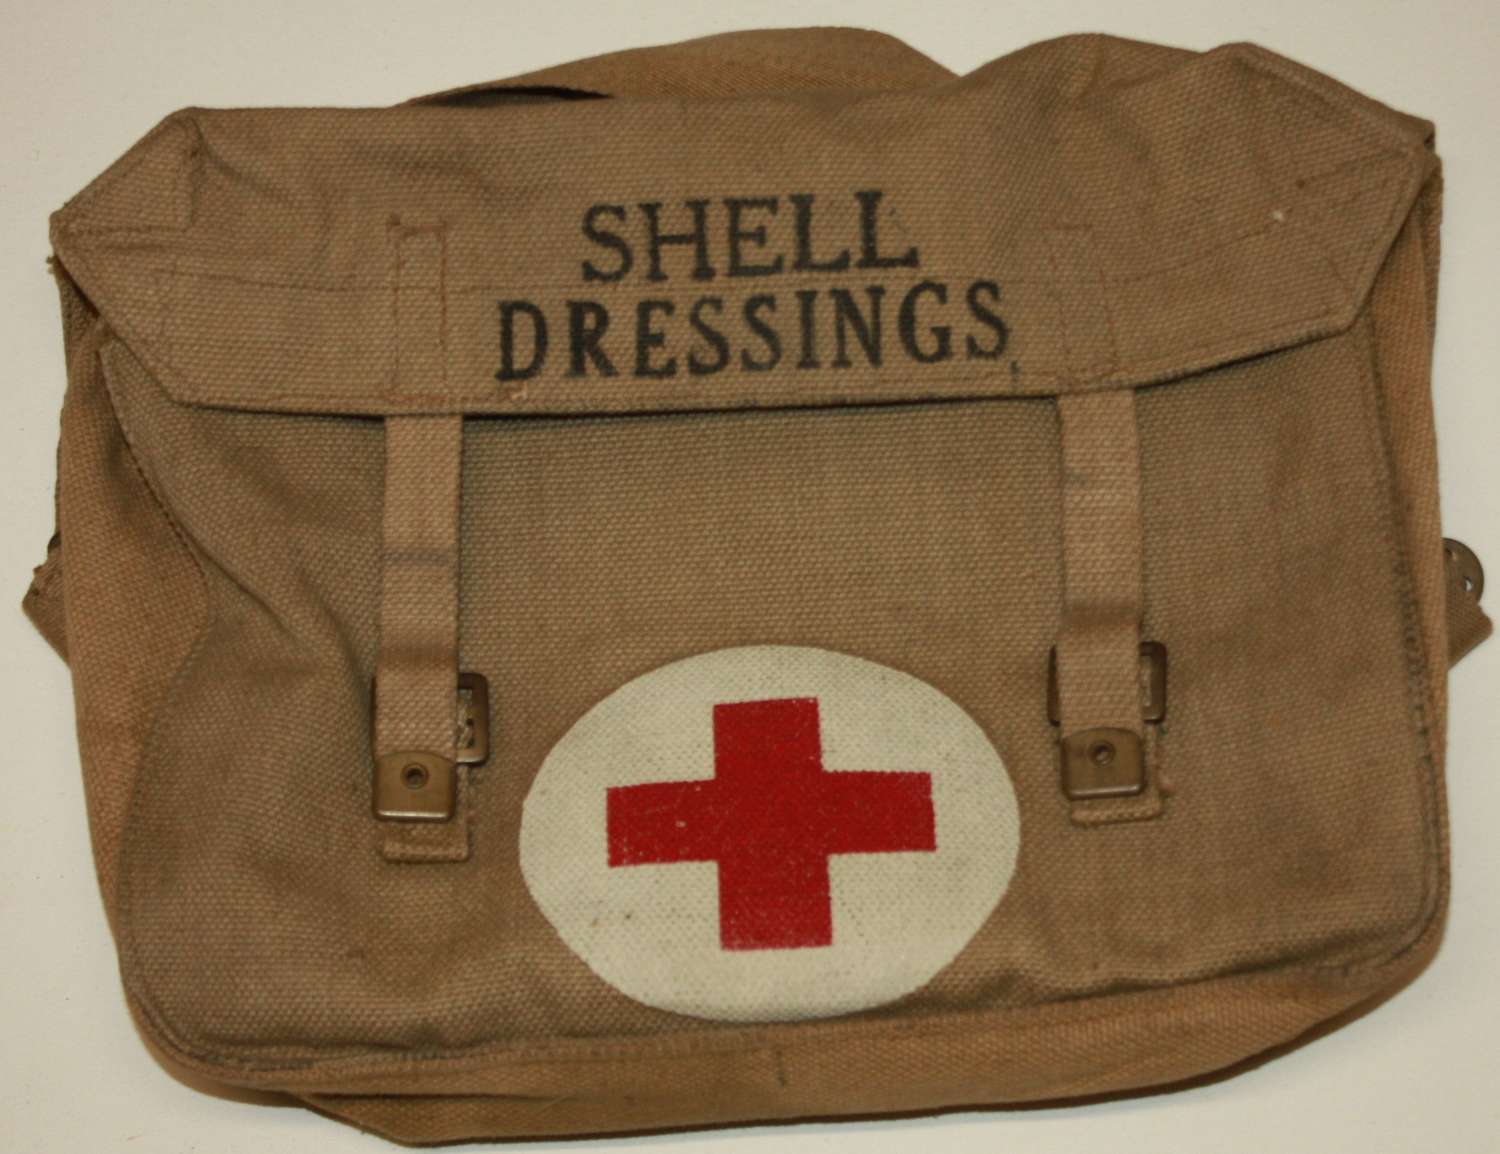 A 1942 DATED SHELL DRESSING BAG